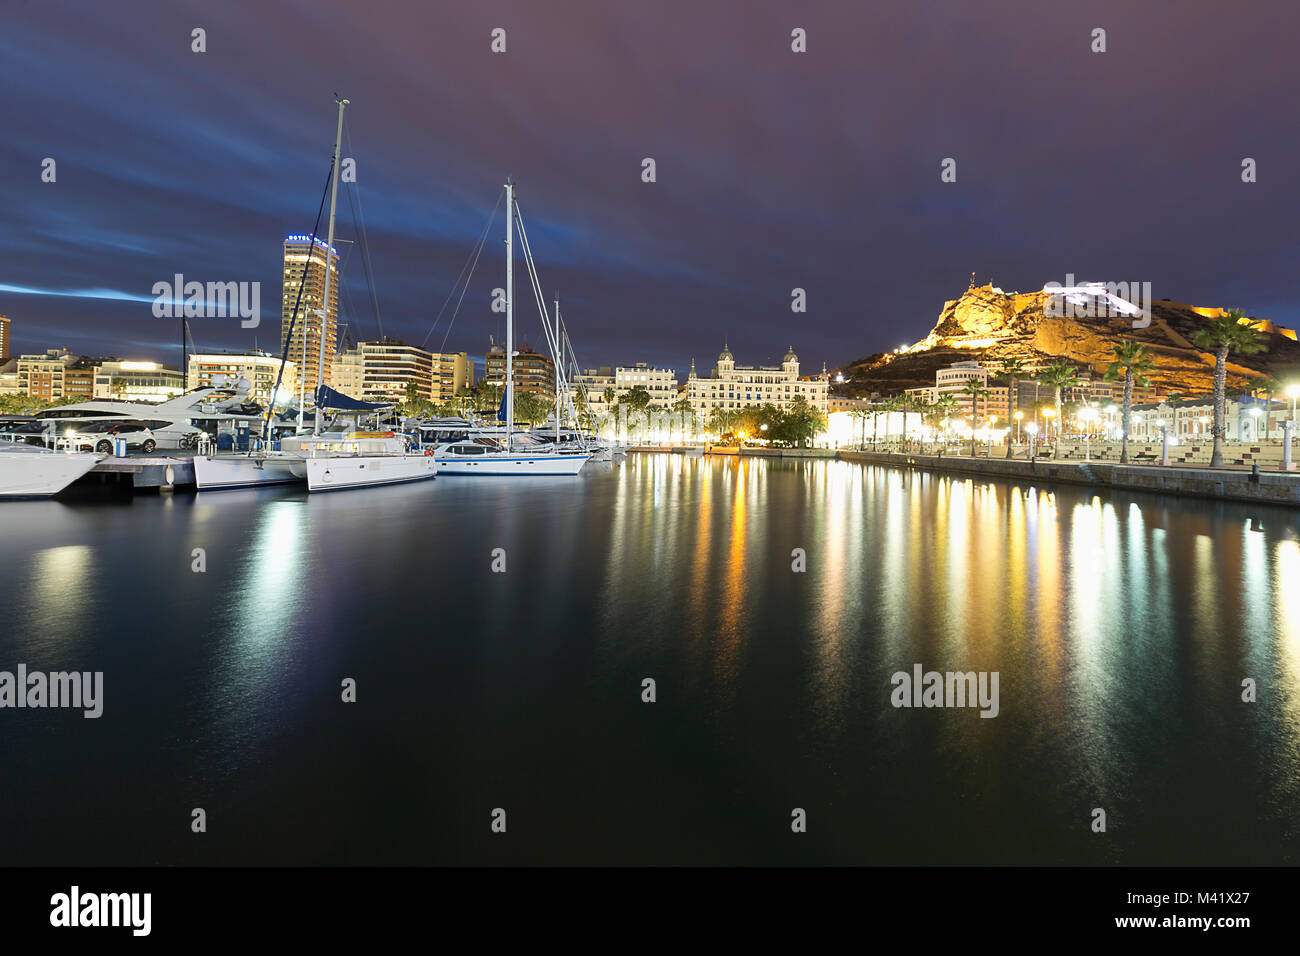 Alicante, Spain. February 9, 2018: Views of the Port of Alicante and the city during a cold winter sunset. Stock Photo